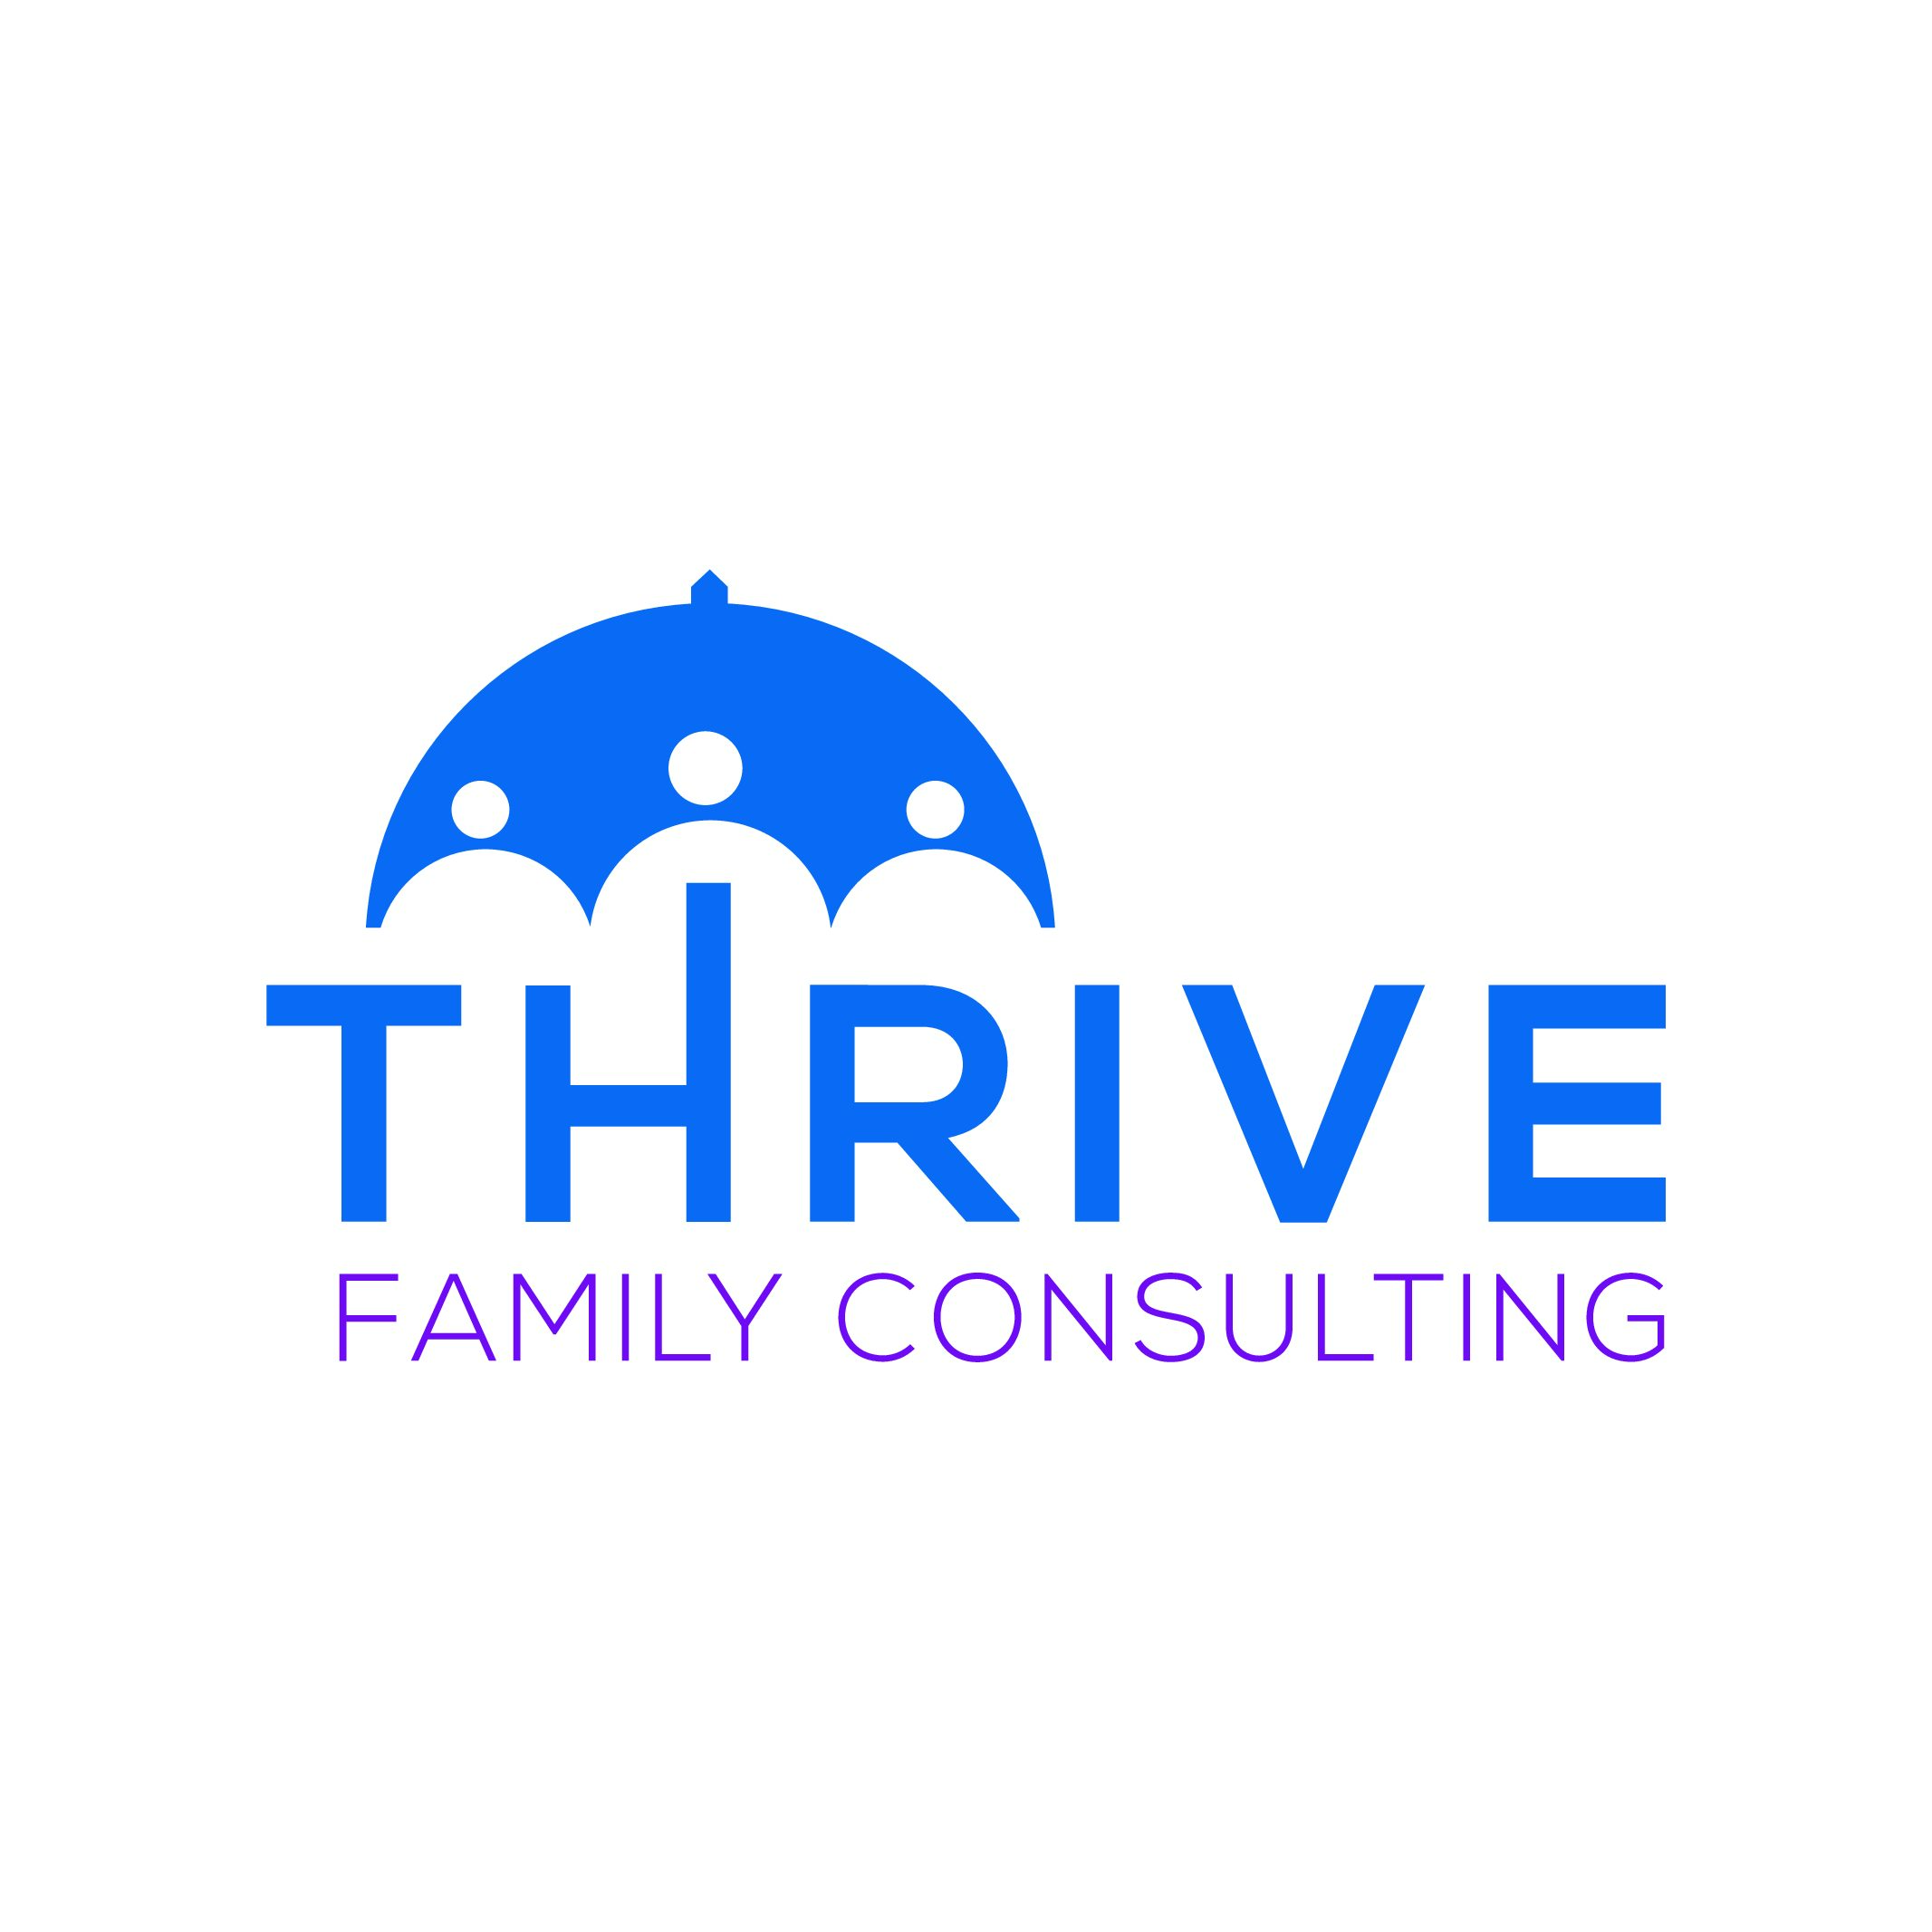 Thrive Family Consulting families!